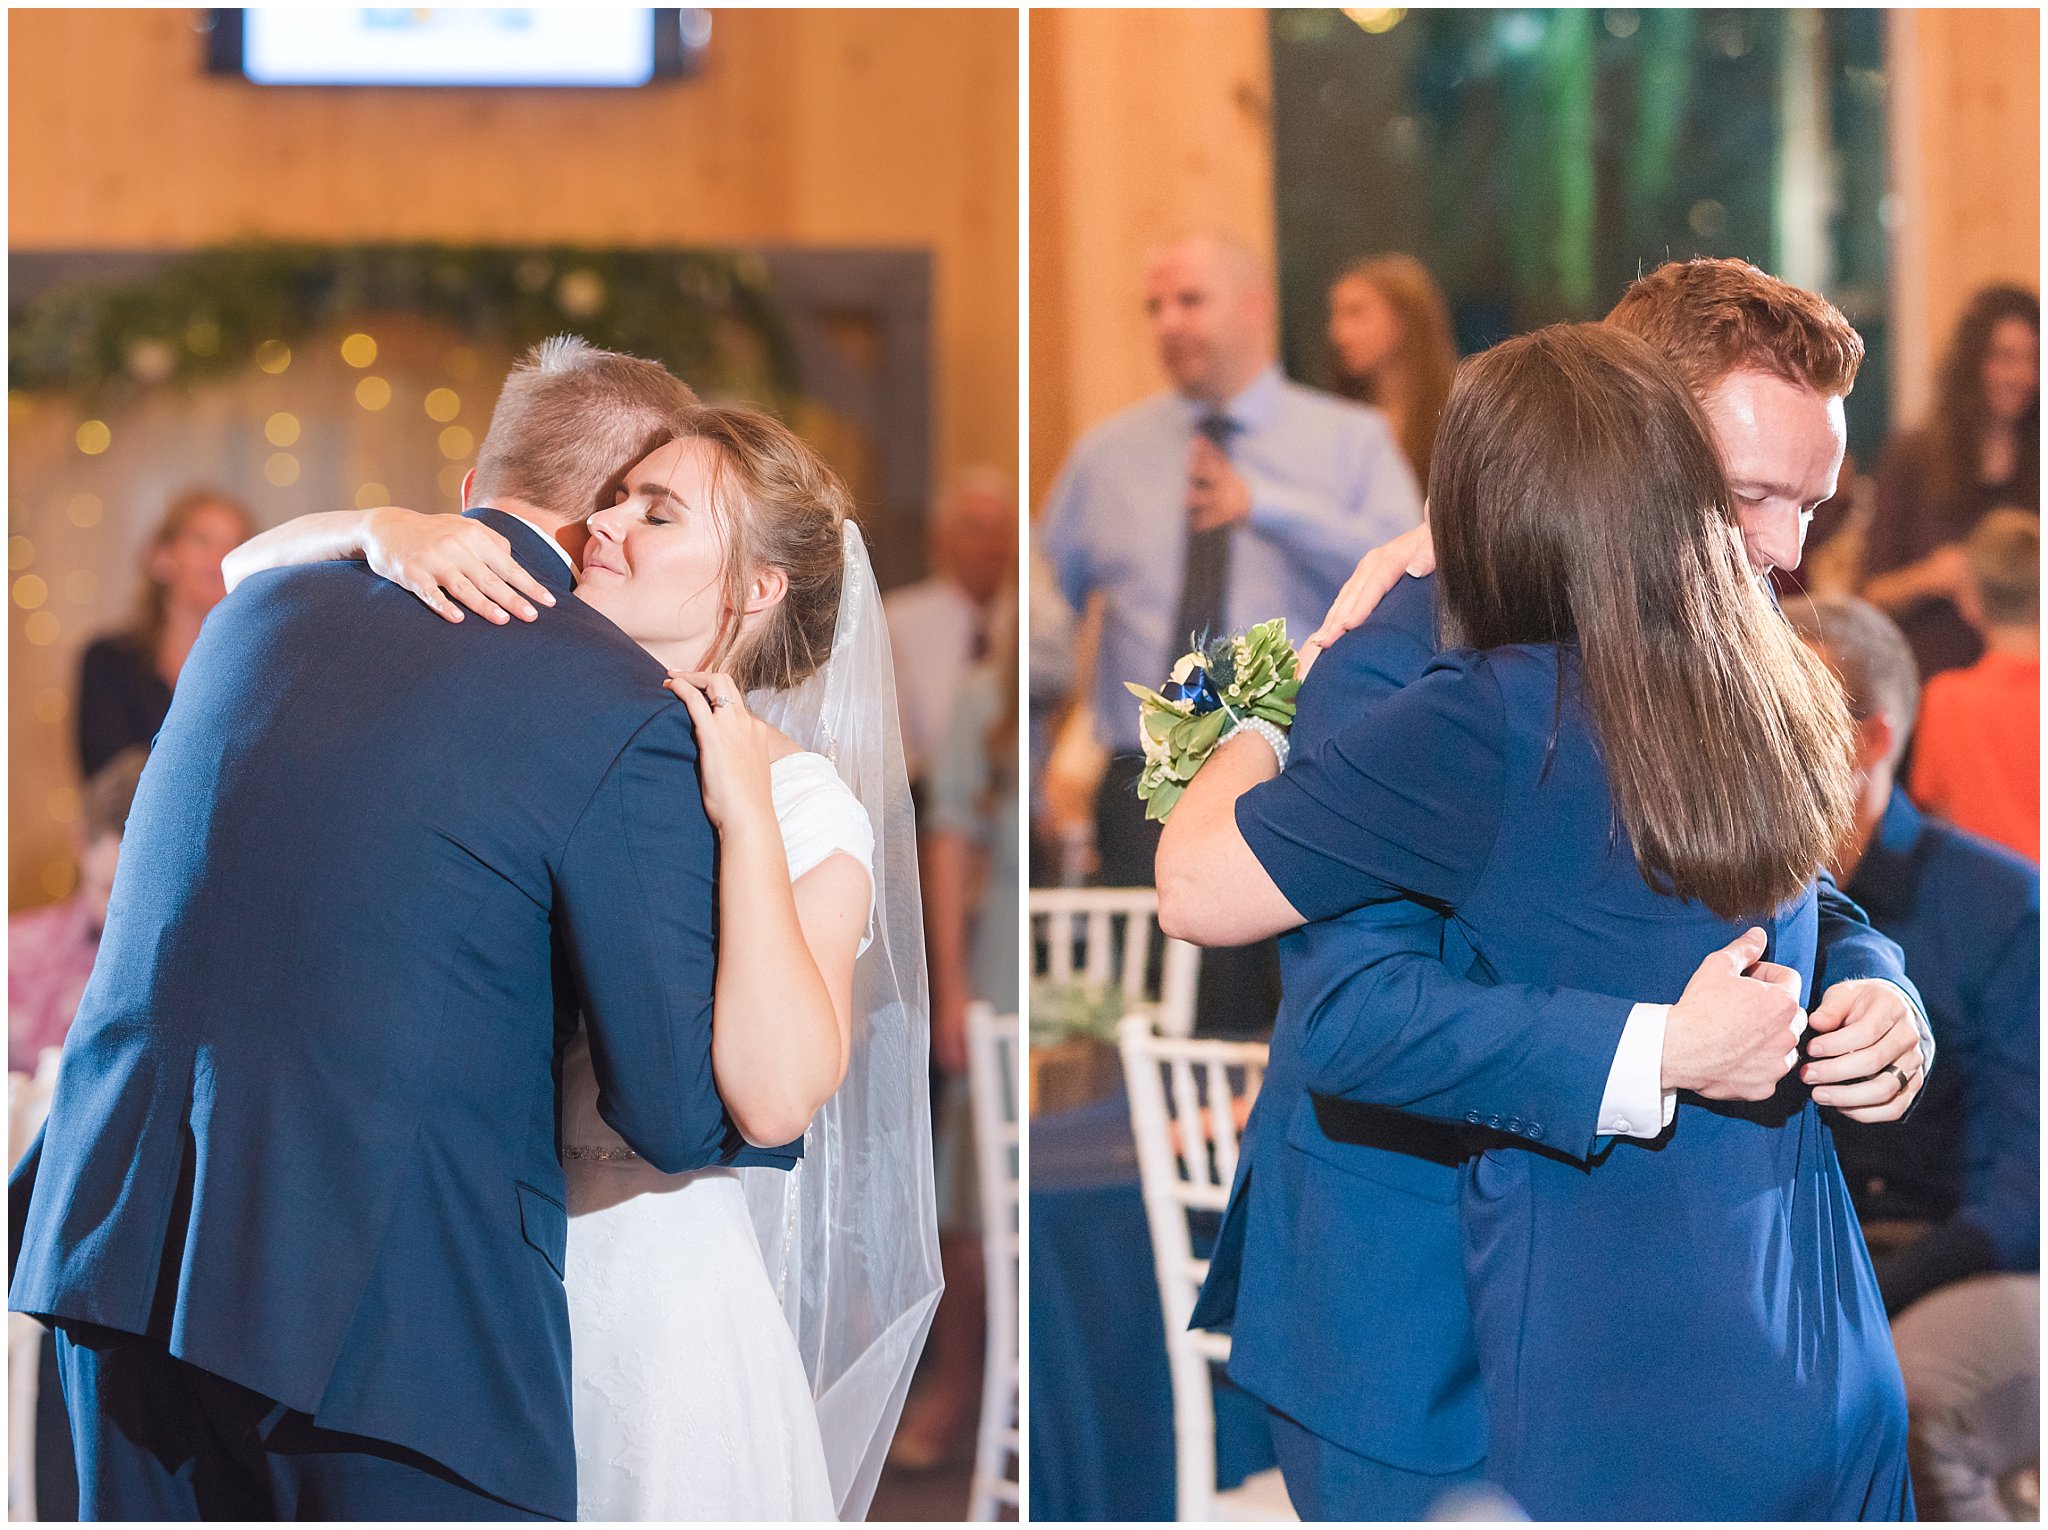 Father daughter and mother son dance at reception | Oak Hills Reception and Events Center | Jessie and Dallin Photography